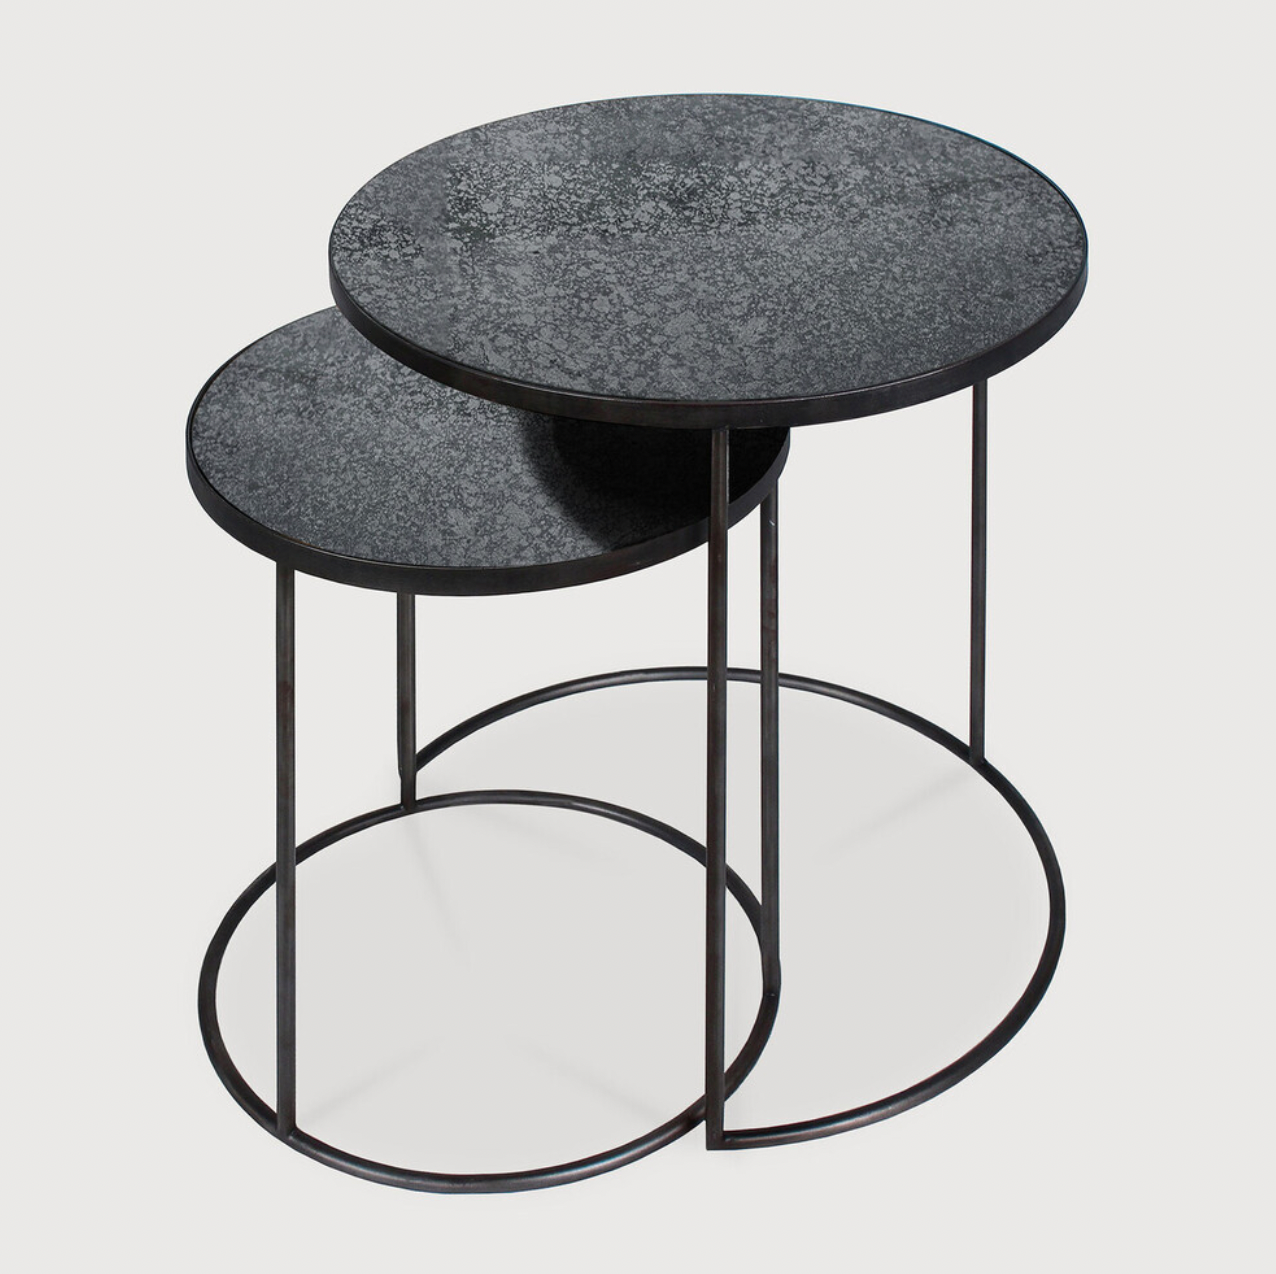 Featuring a heavy aged mirror surface, this Charcoal Nesting Side Table Set brings a unique look to any space. Place beside the sofa, sitting next to your bed, or as a complementary piece to a work of art, its adaptability offers many possibilities.  Dimensions: 22.5"w x 22.5"d x 27.5"h   Material: Mirror